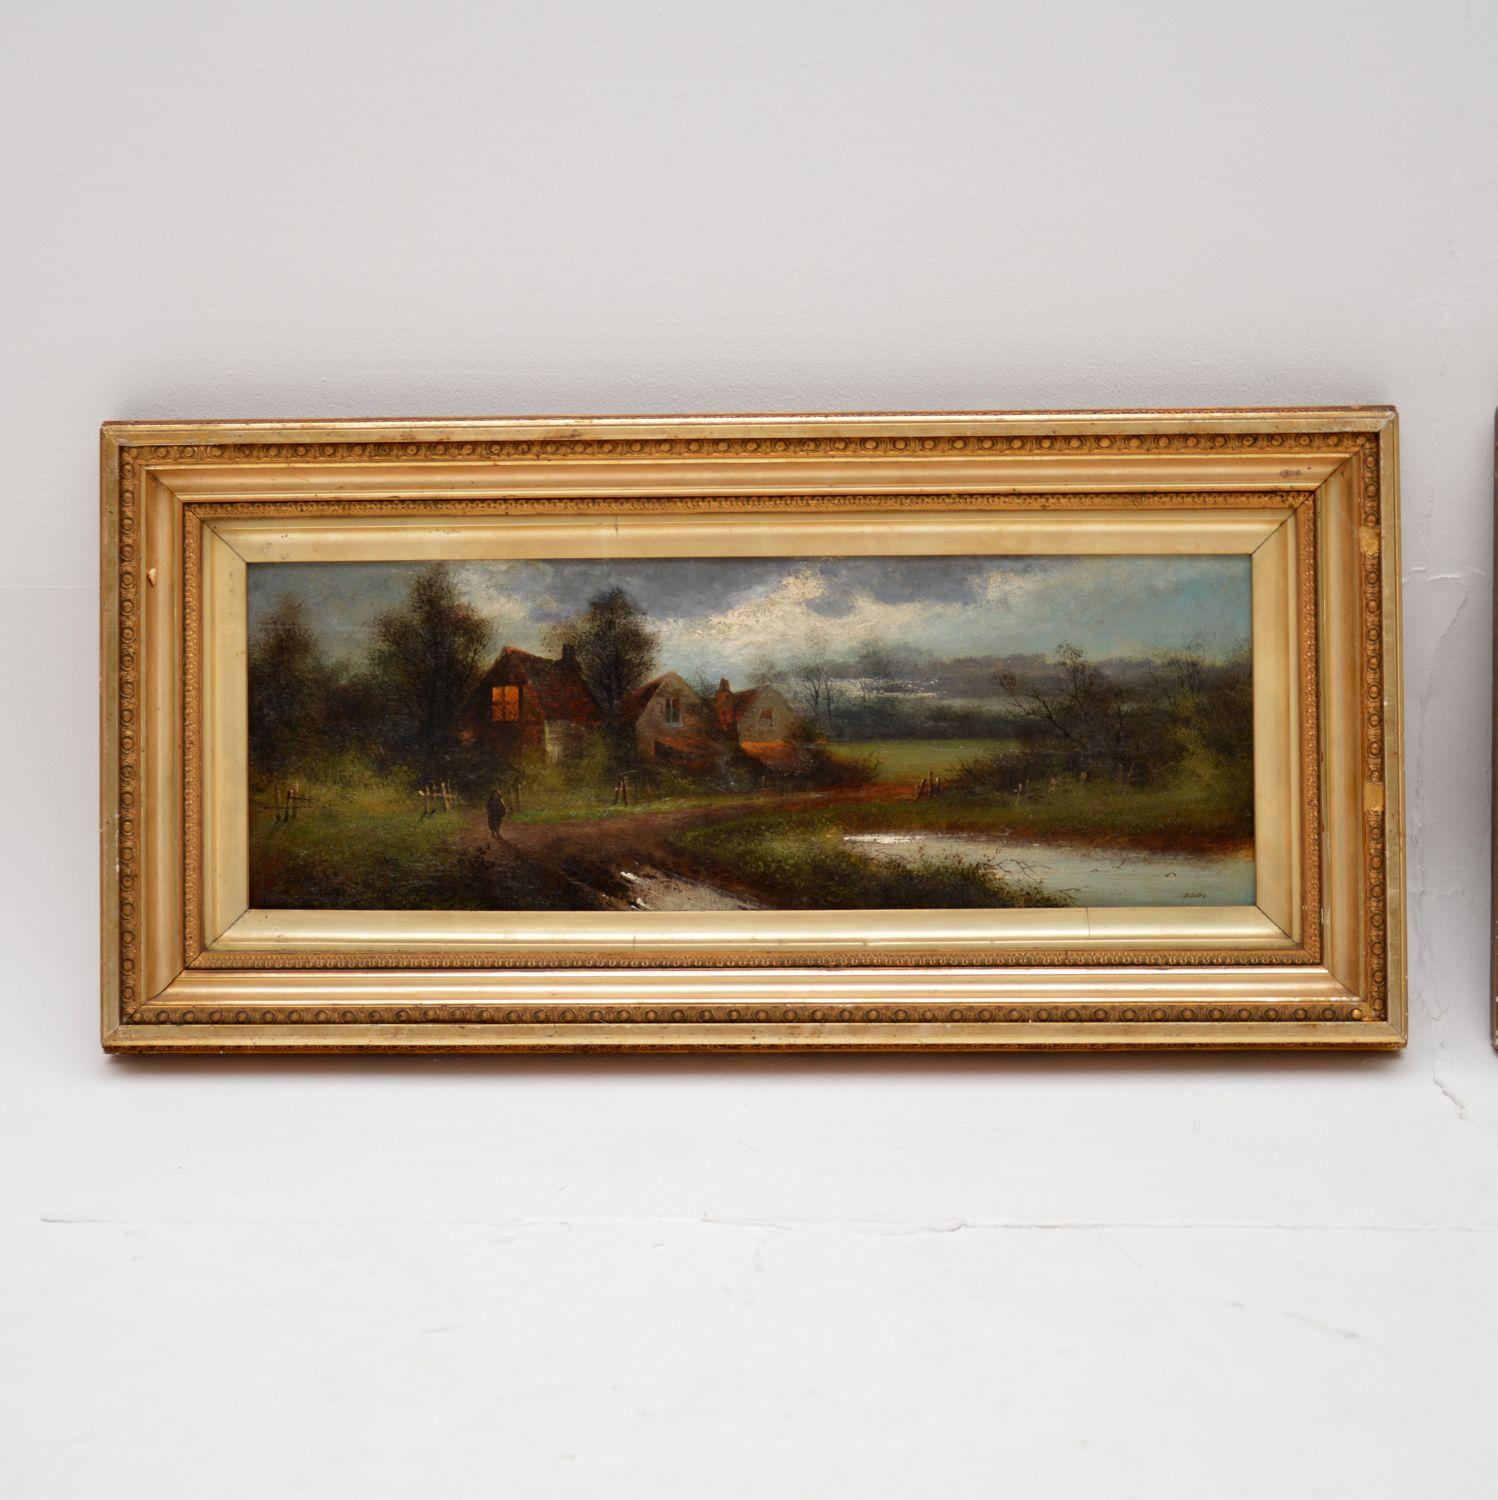 A beautiful pair of antique landscape oil paintings by J. C Jonas. They were made in England, they date from around 1880-1900.

The paintings are beautifully executed, depicting a countryside lake scene, it appears to be two sides of the same lake